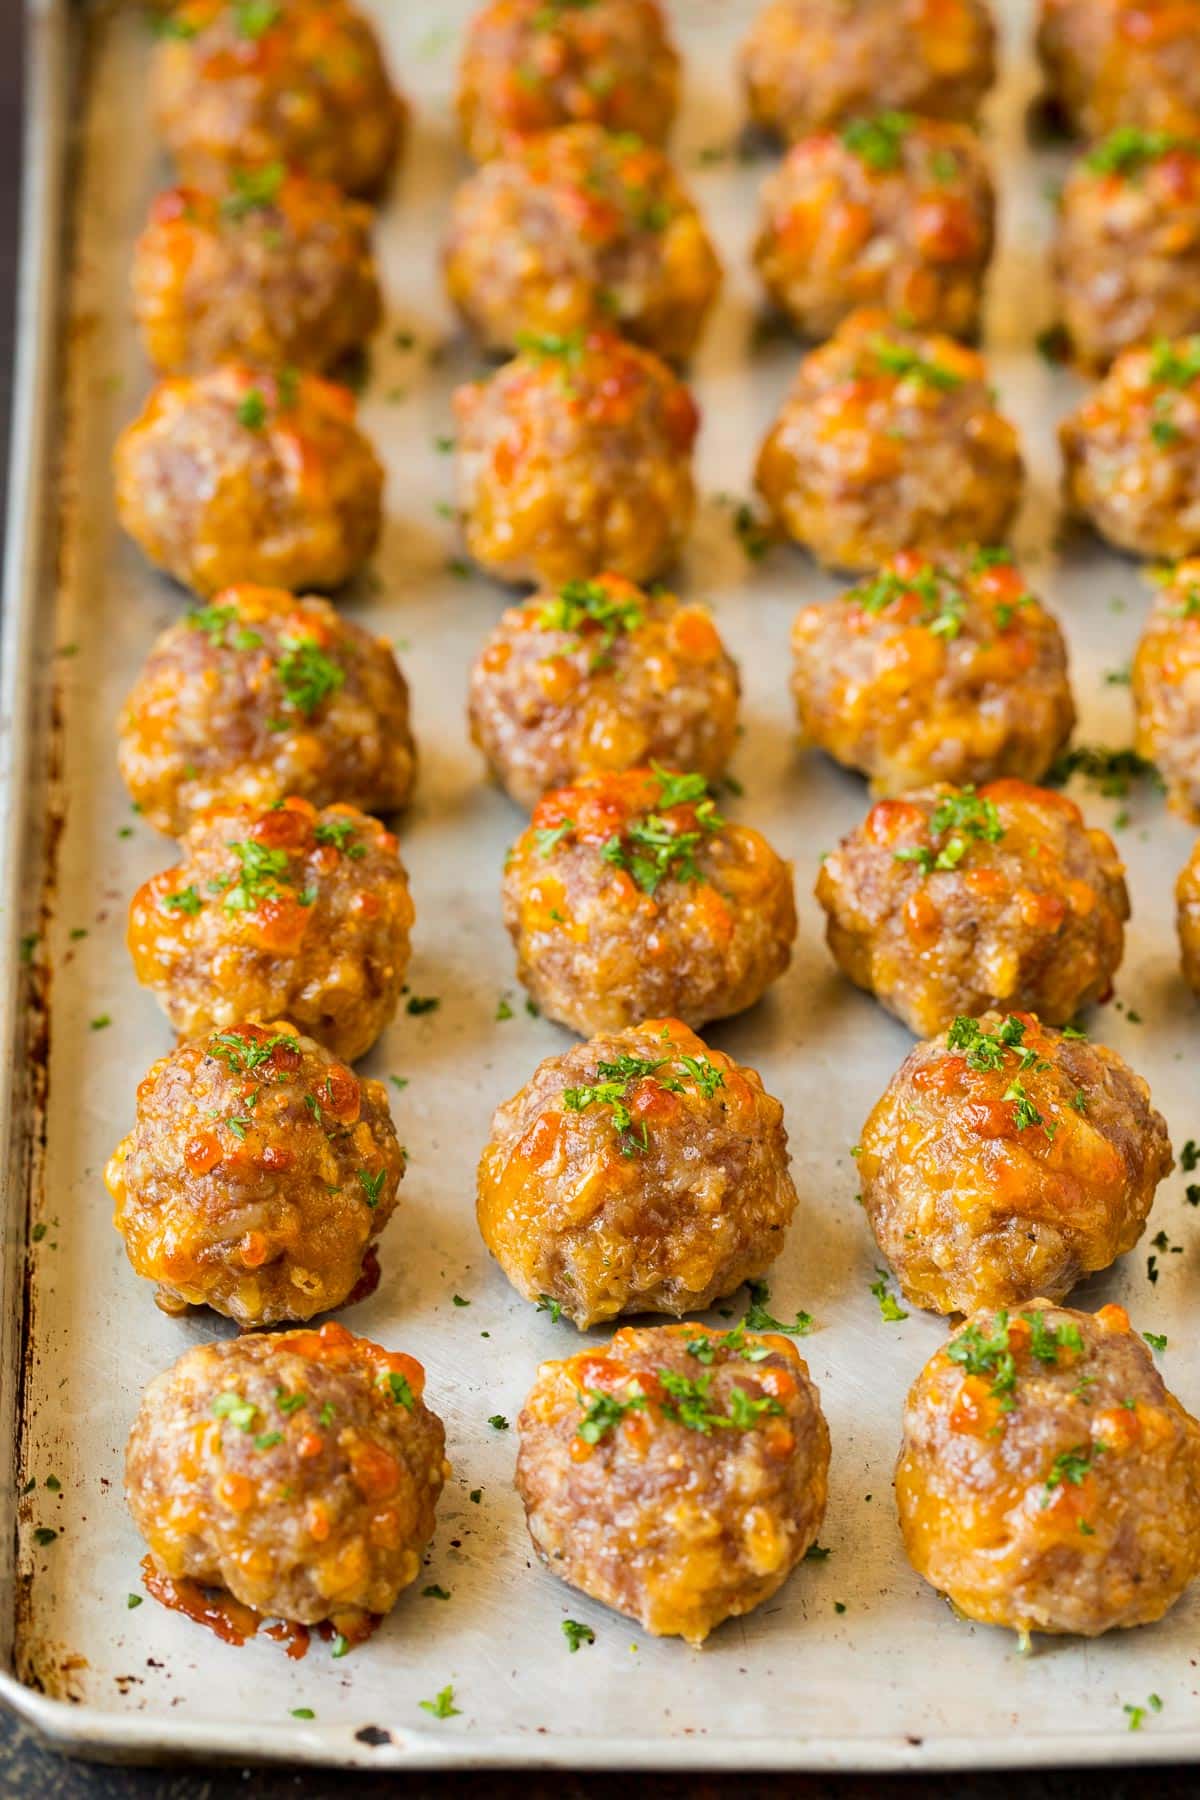 Cooked sausage balls on a pan, topped with parsley.